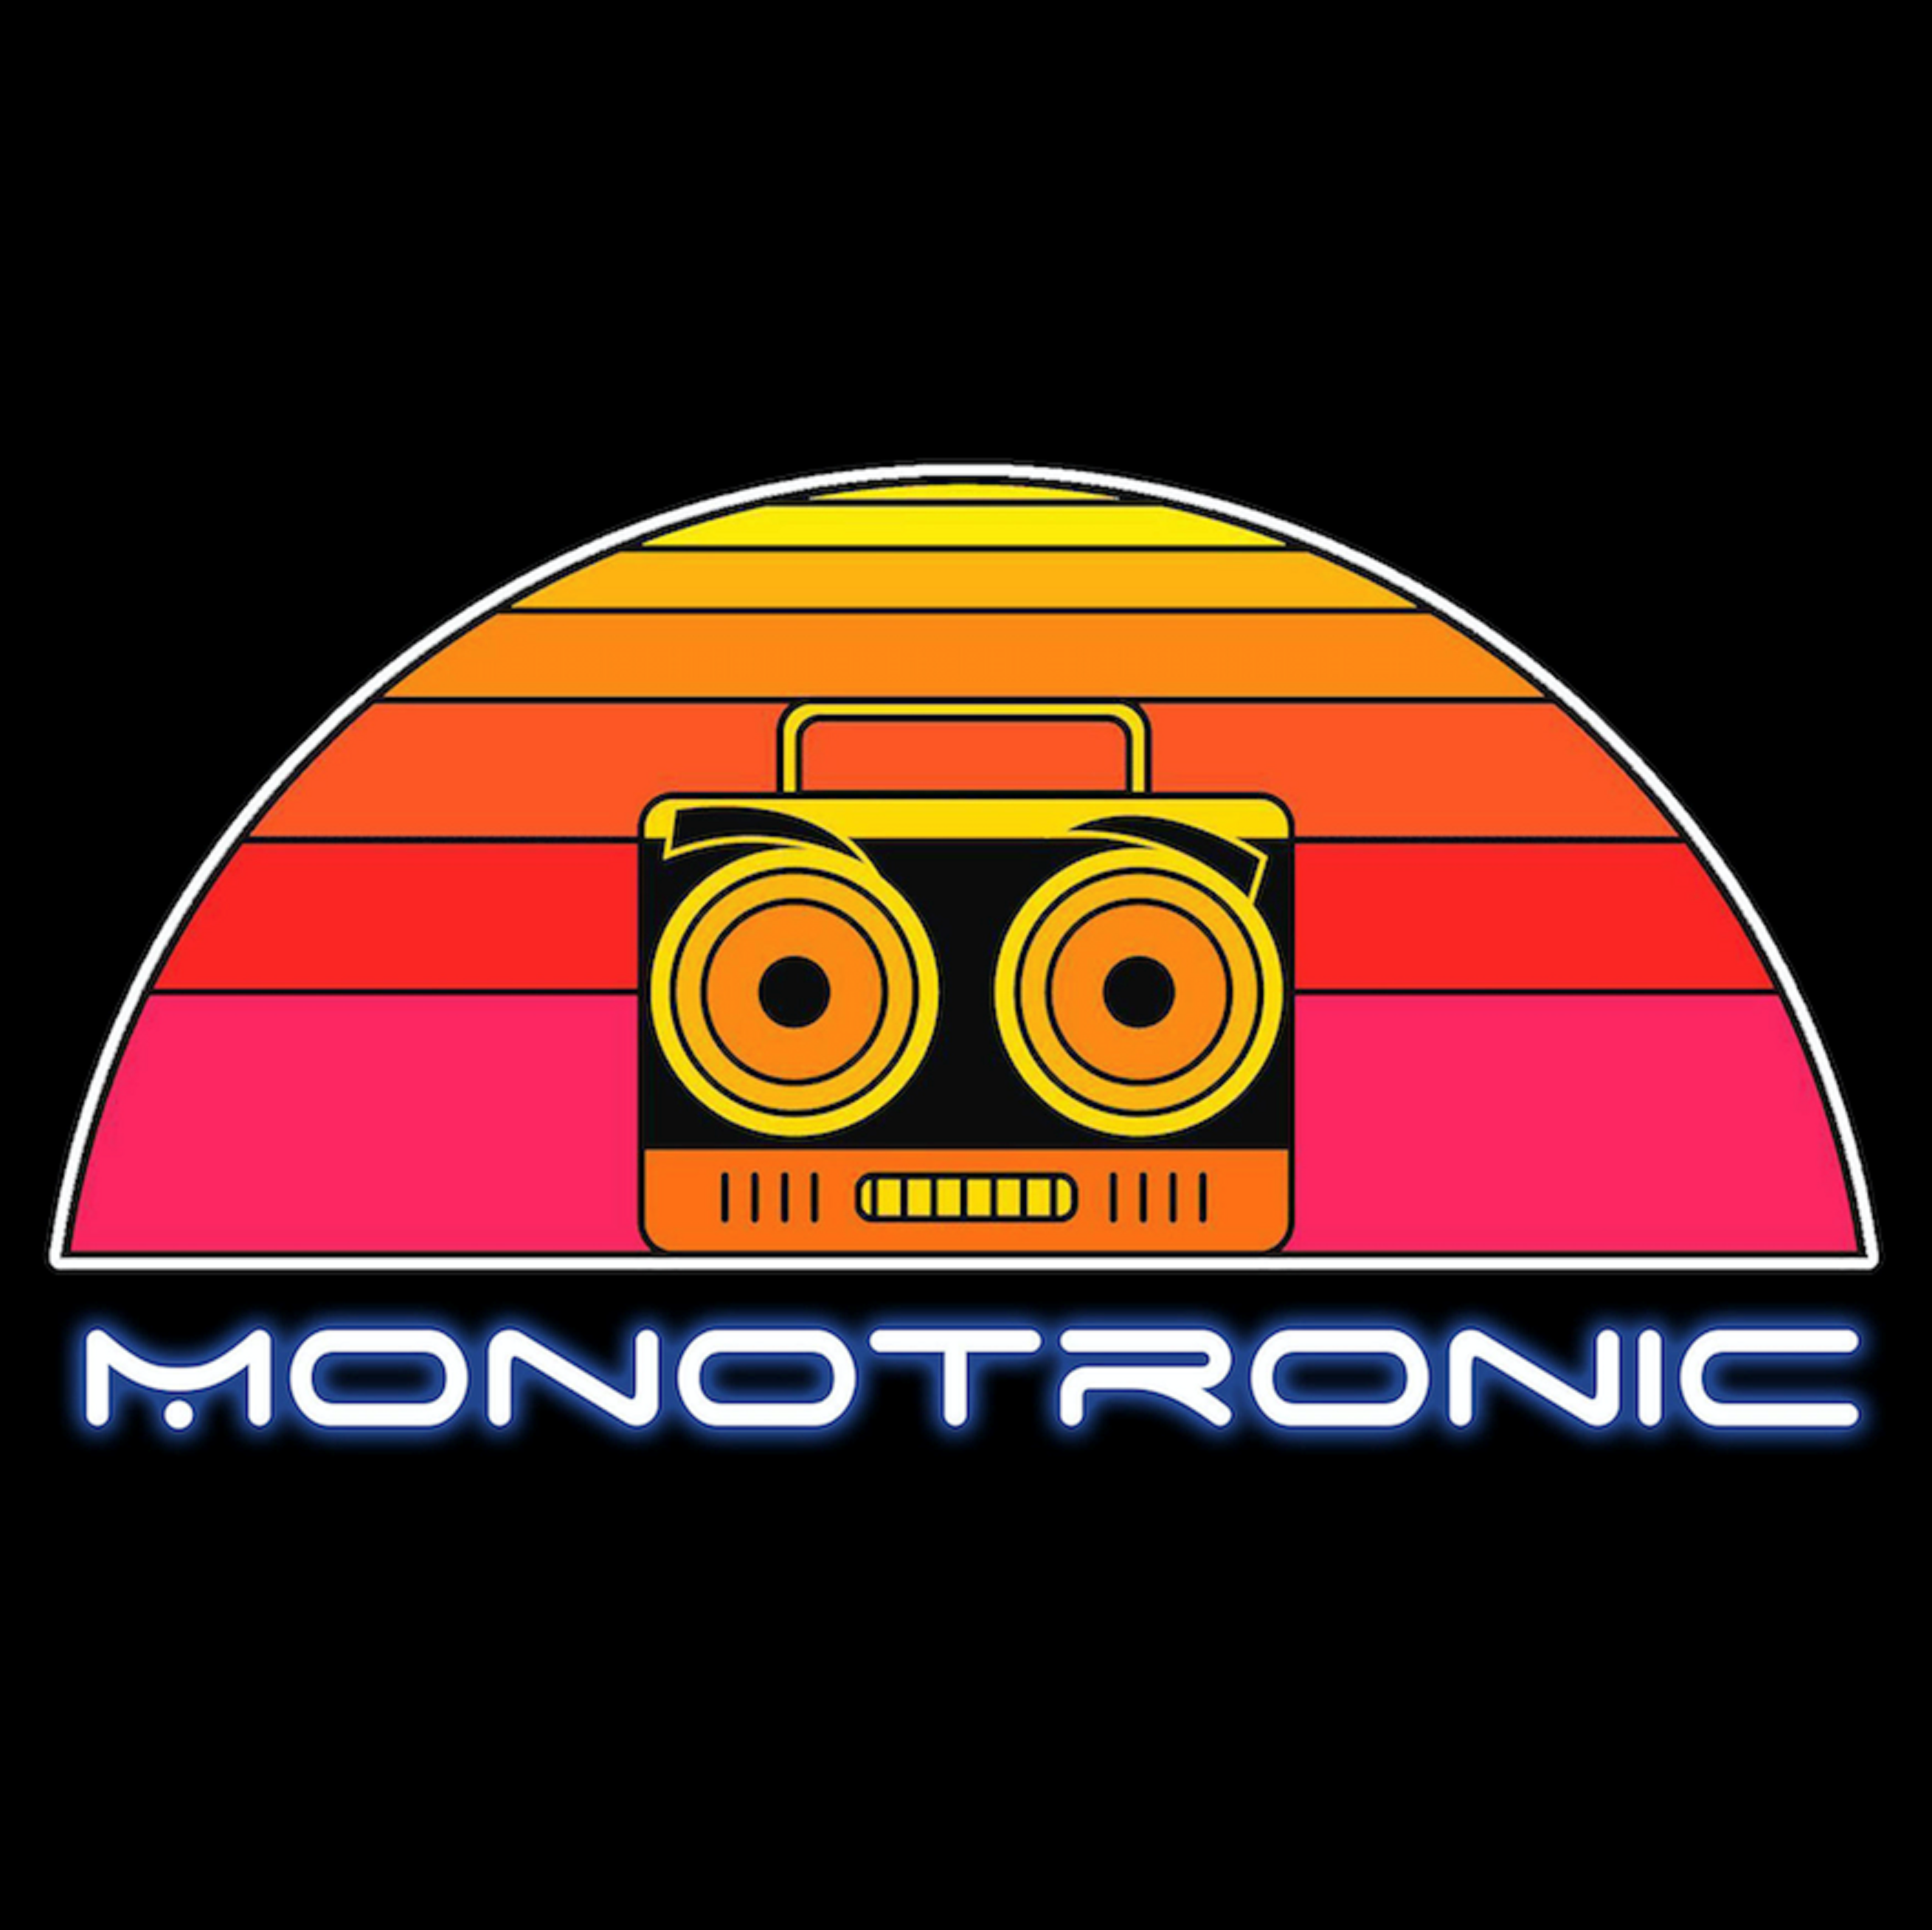 Monotronic SELF-TITLED ALBUMDUE OUT 9/27